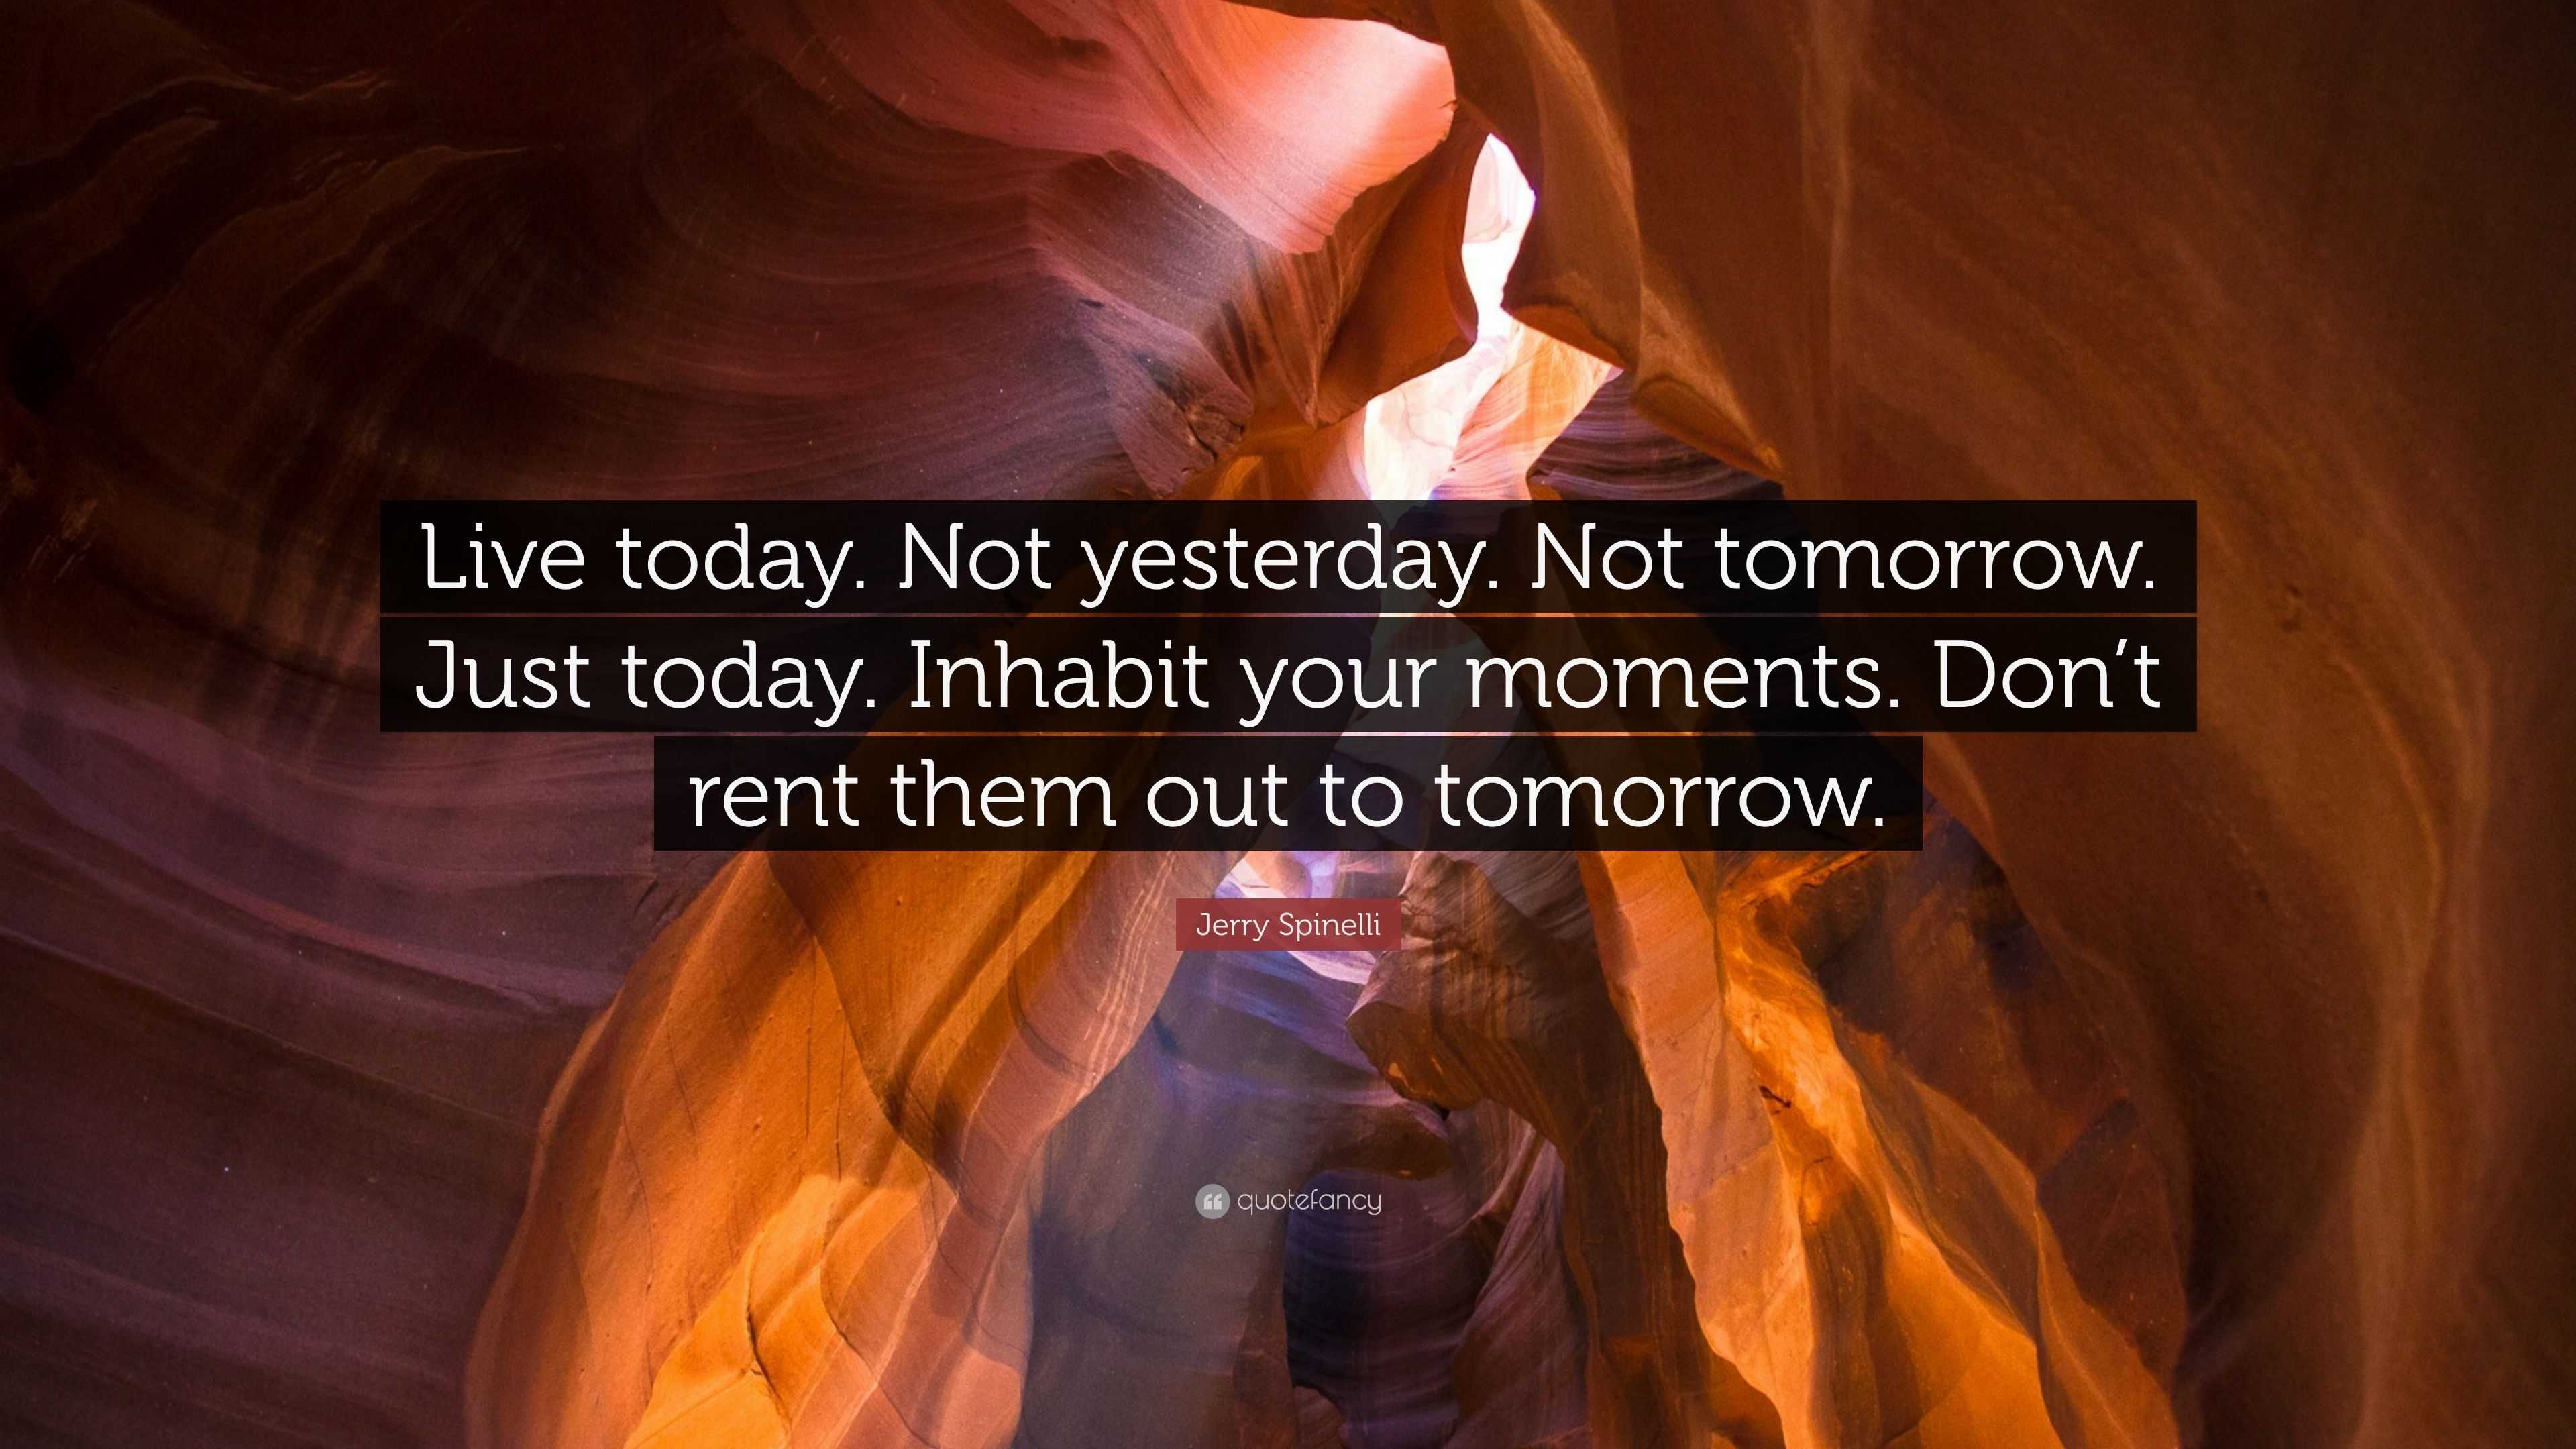 Jerry Spinelli Quote: “Live today. Not yesterday. Not tomorrow. Just